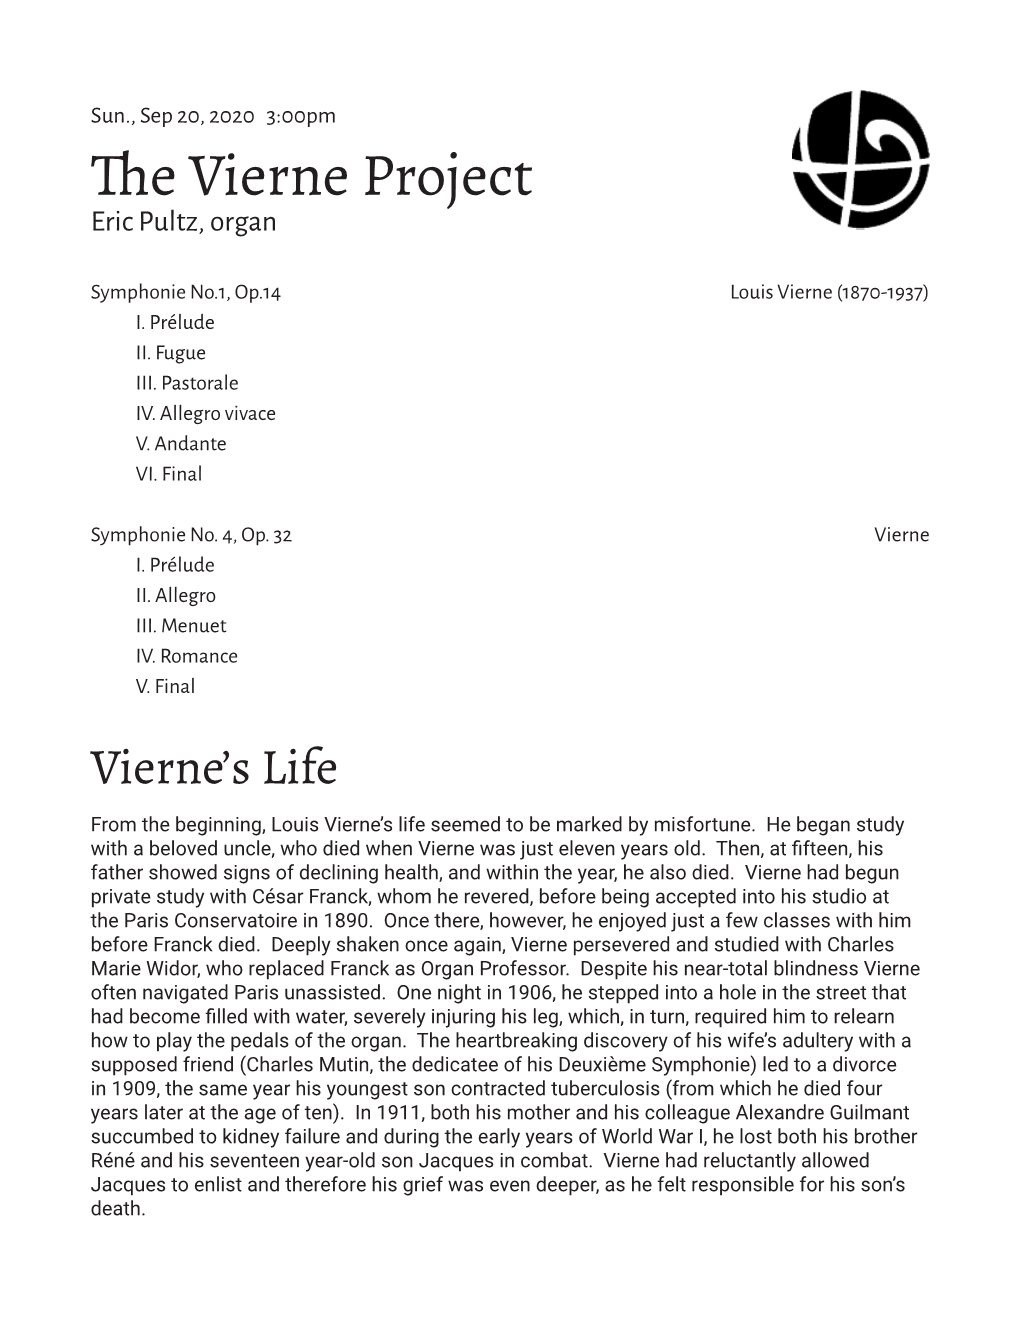 The Vierne Project Eric Pultz, Organ